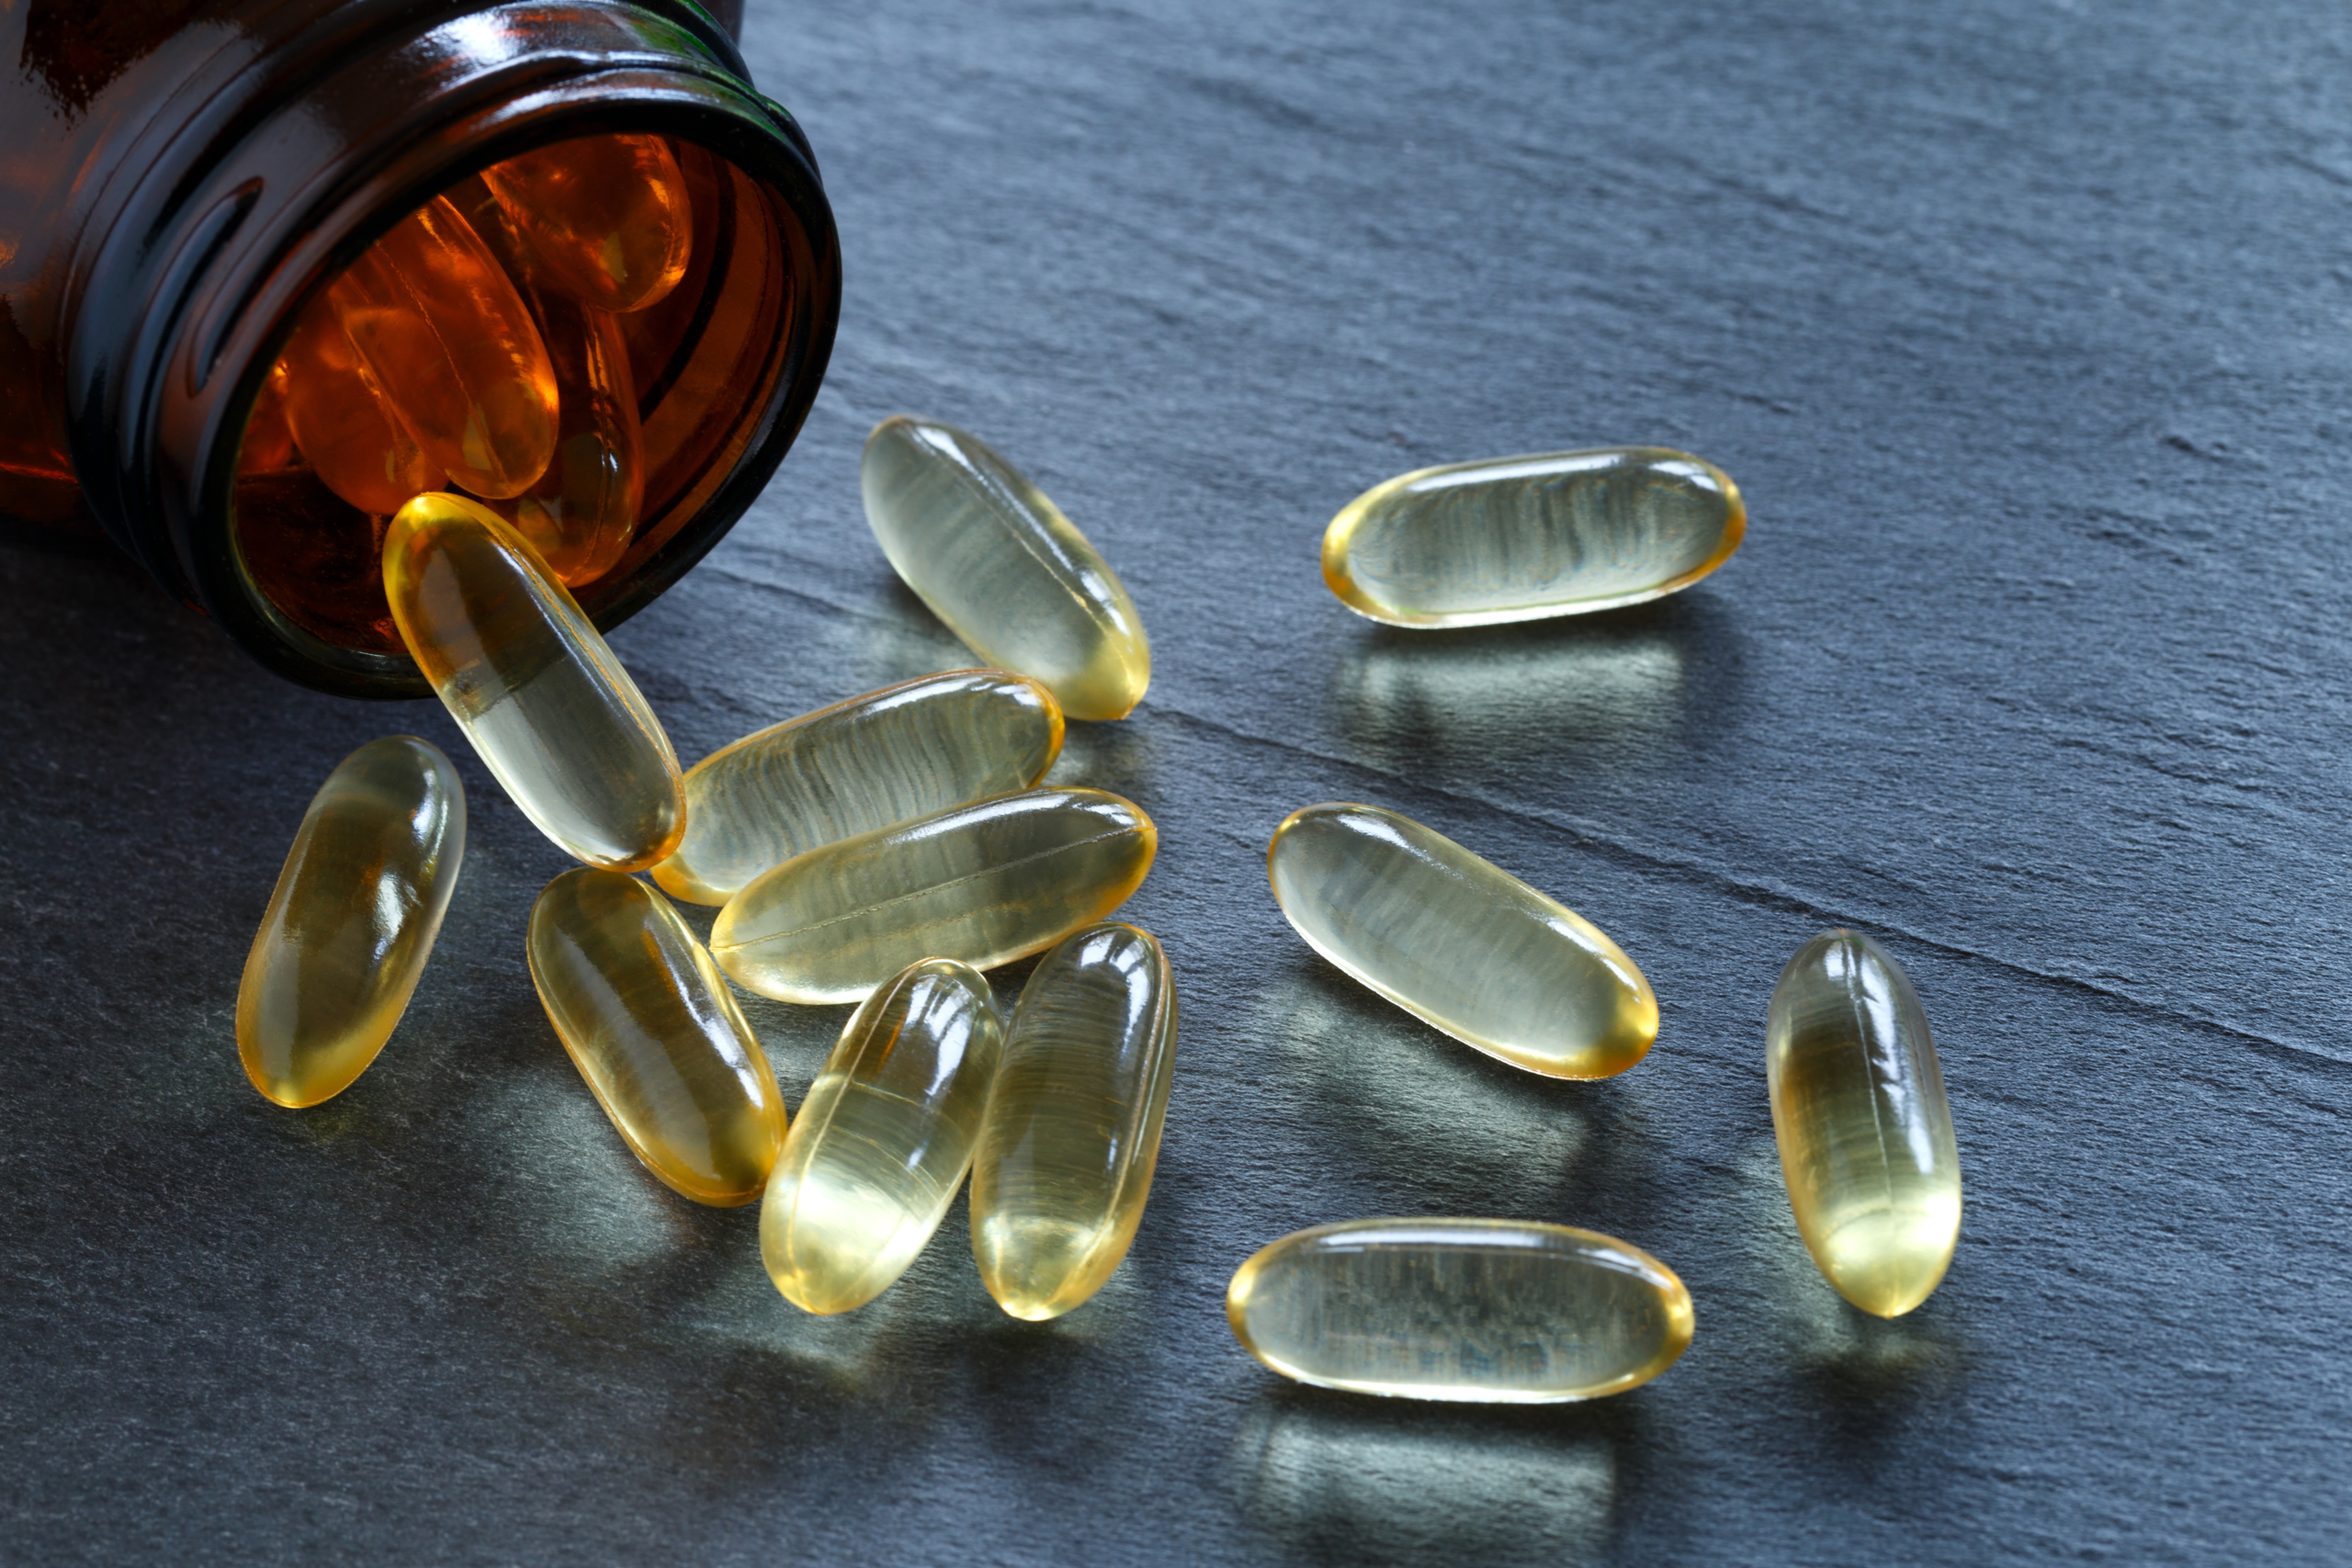 Omega-3 Aids in Medicine Addiction Recovery